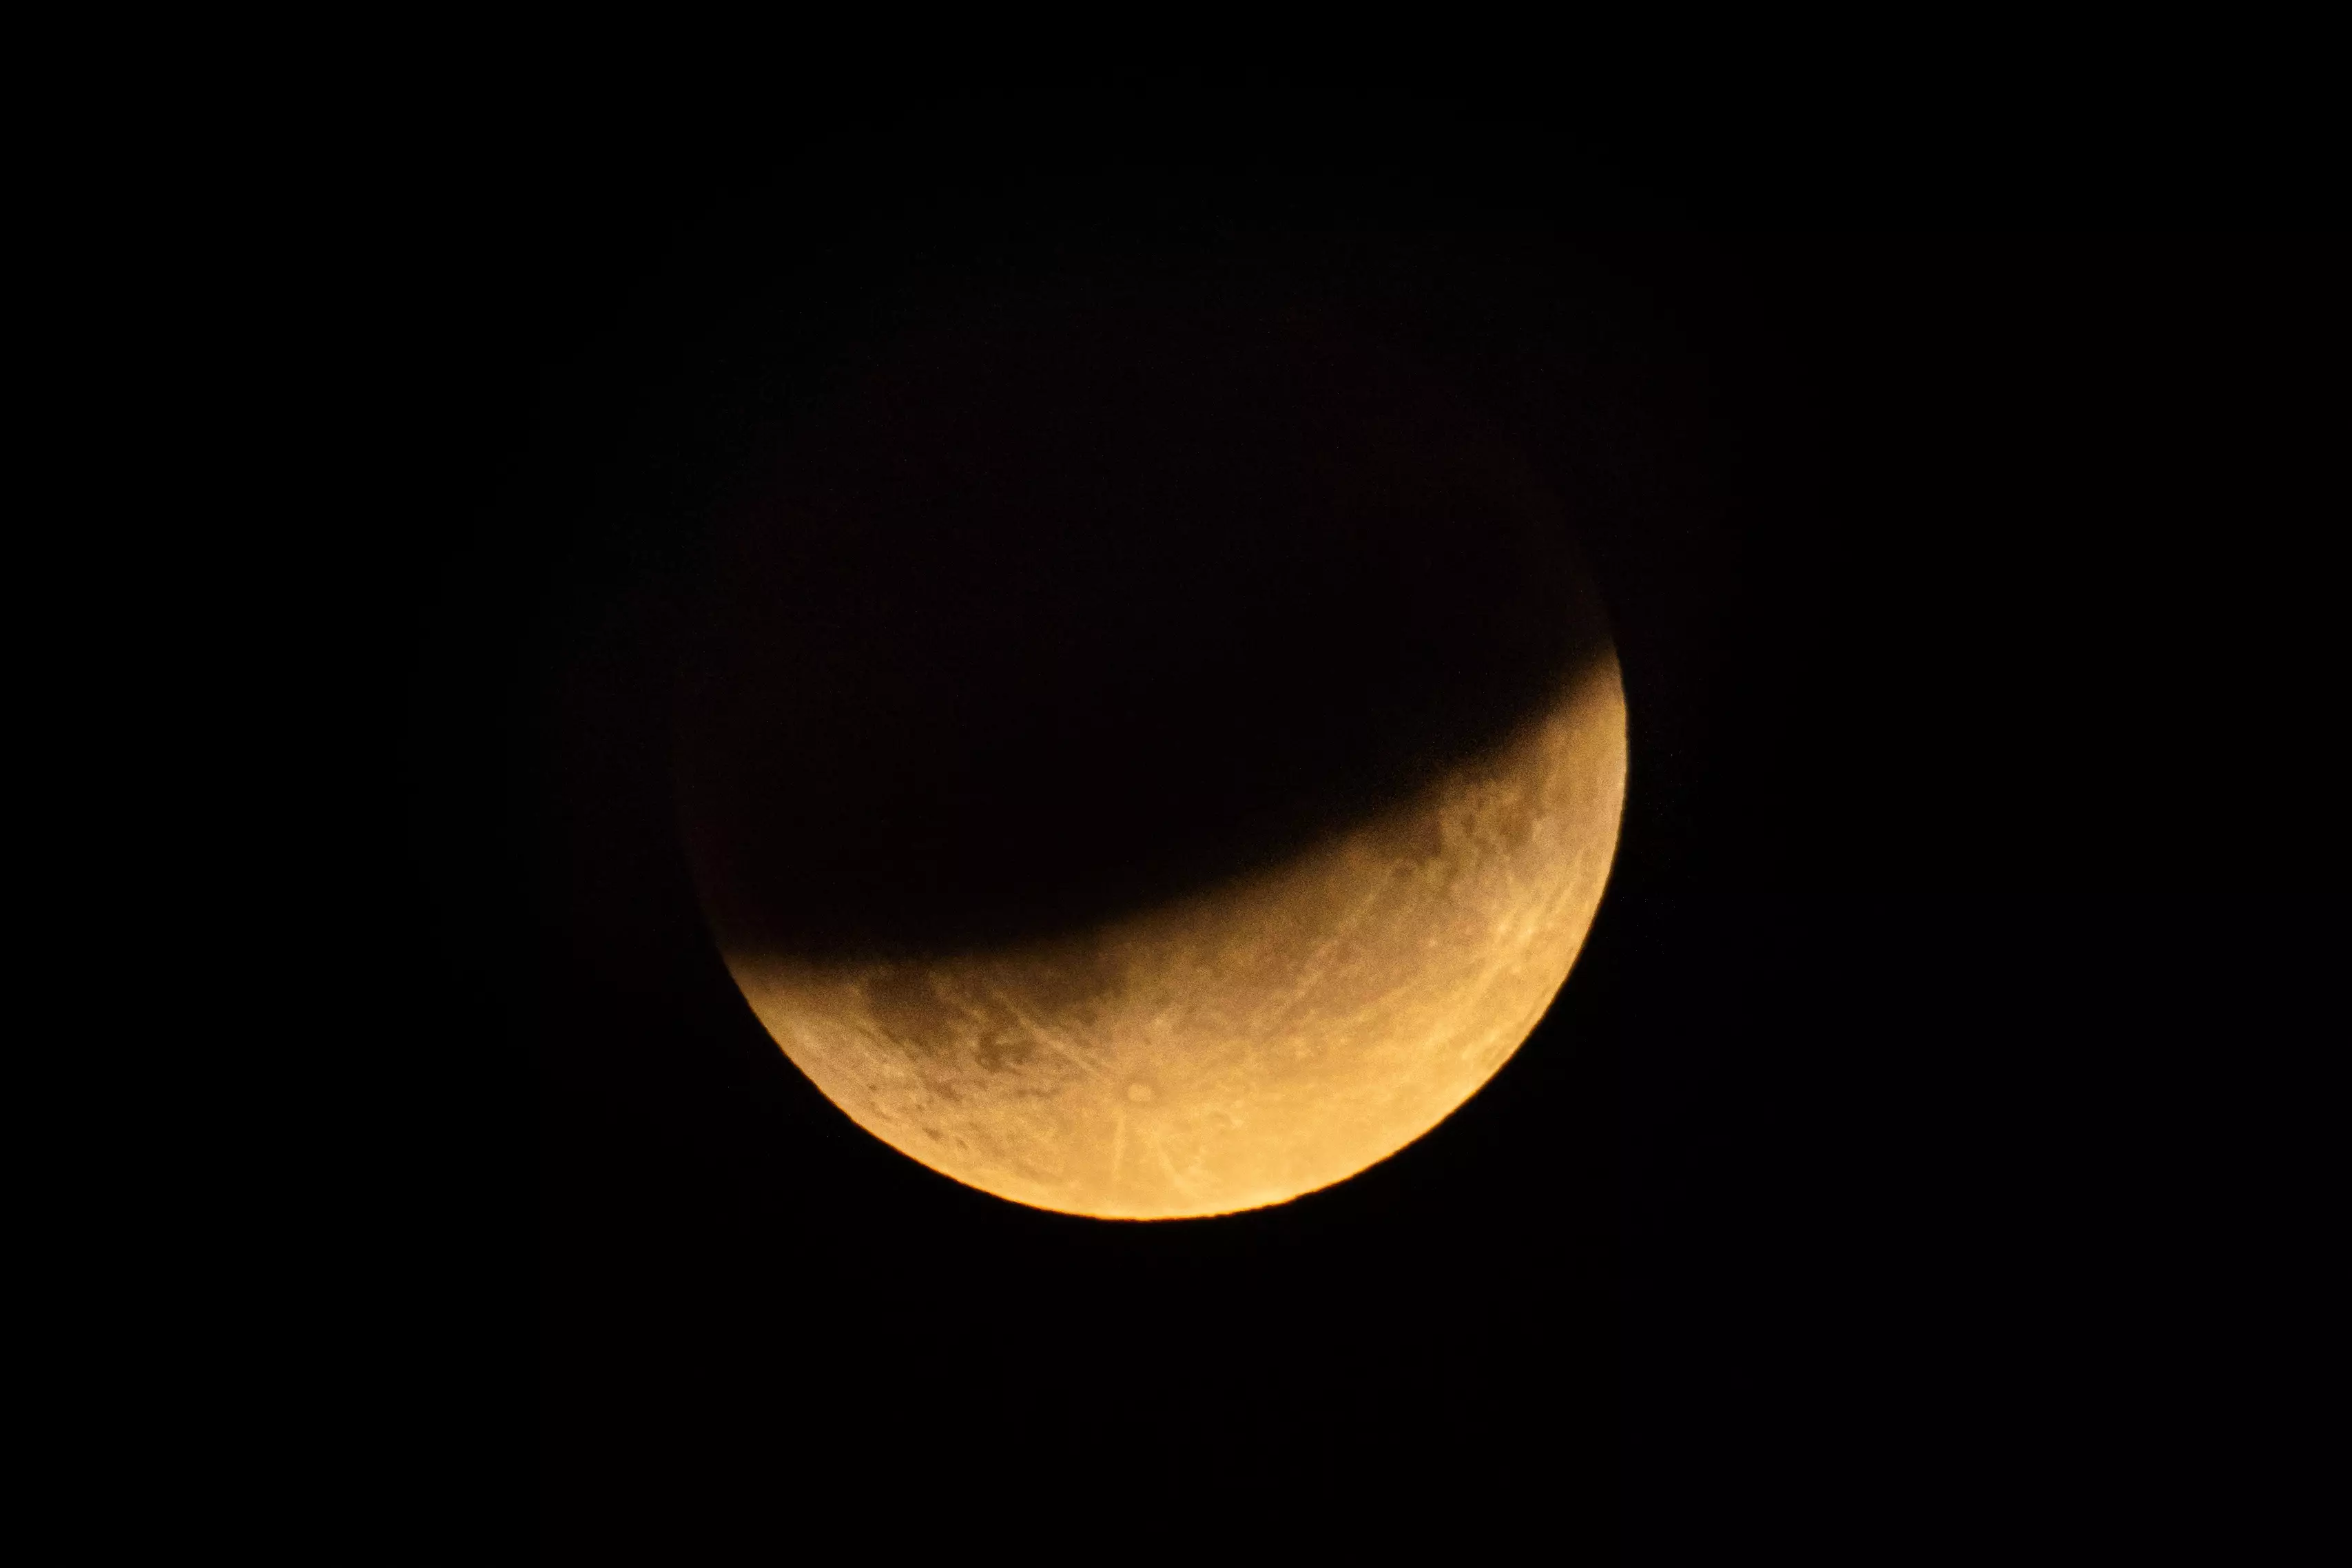 The half-blood moon spotted during a partial eclipse over London in 2019 (